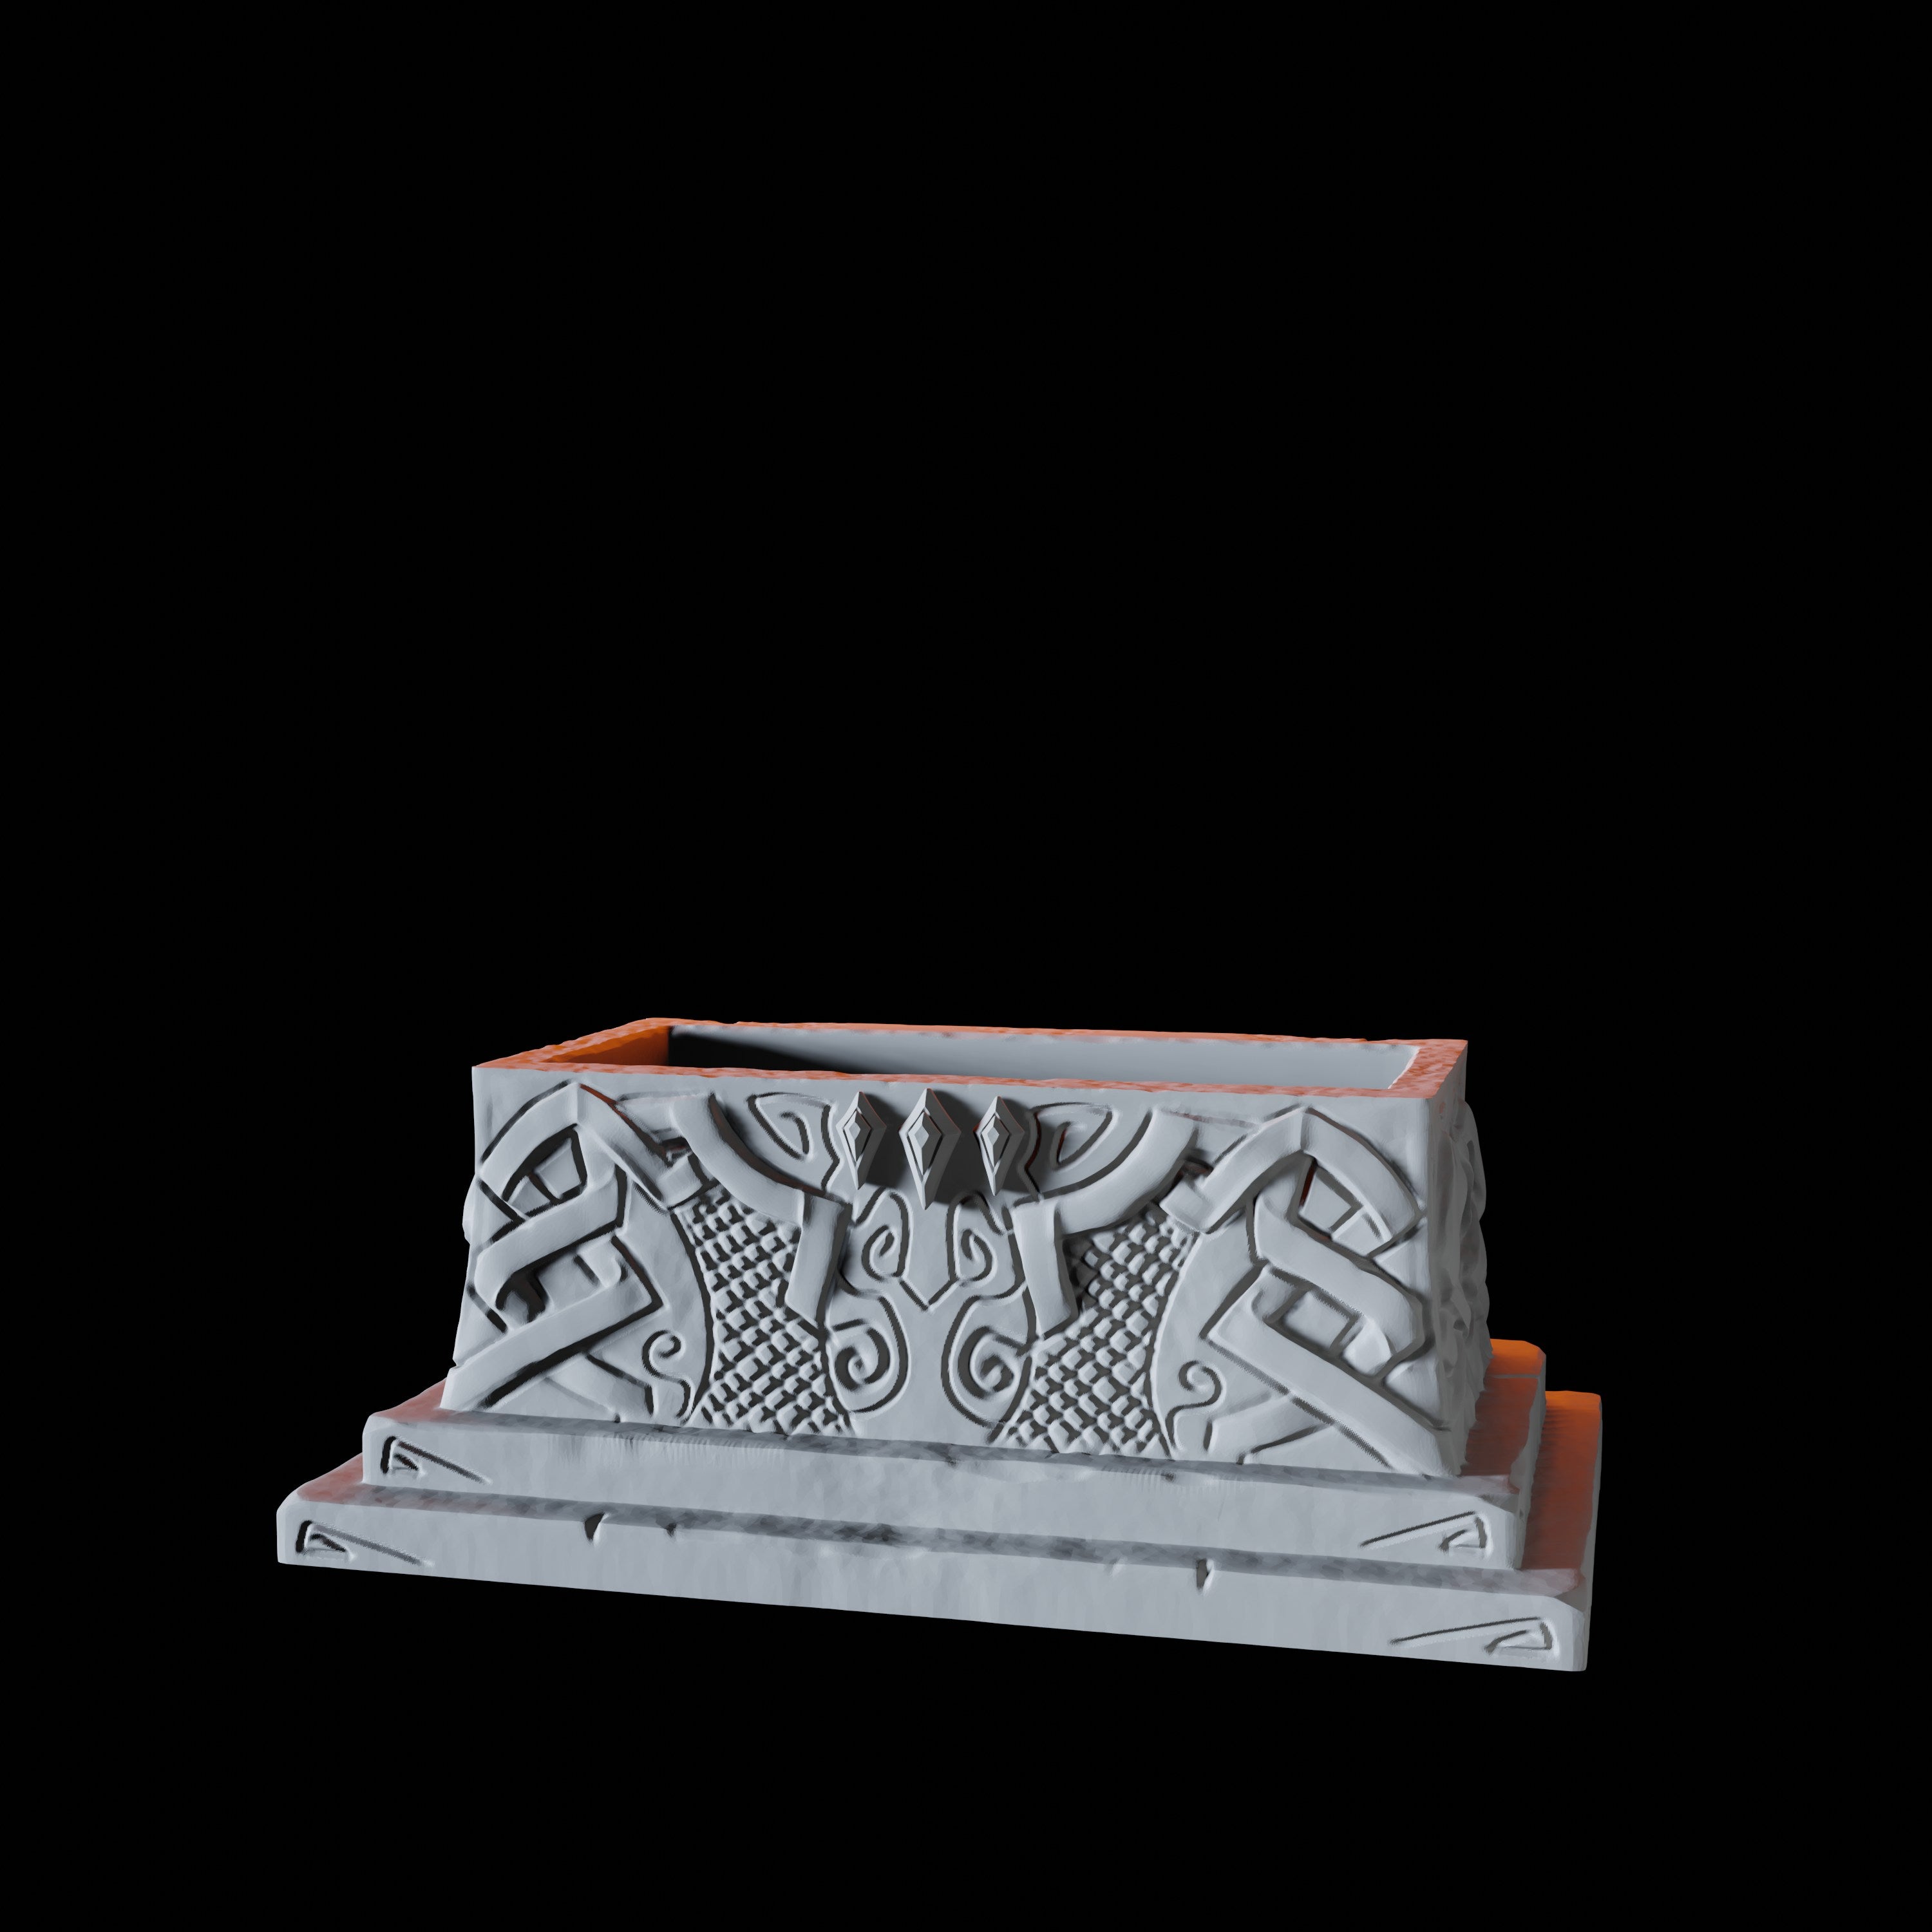 Coffin - Scatter Terrain Miniature for Dungeons and Dragons - Myth Forged